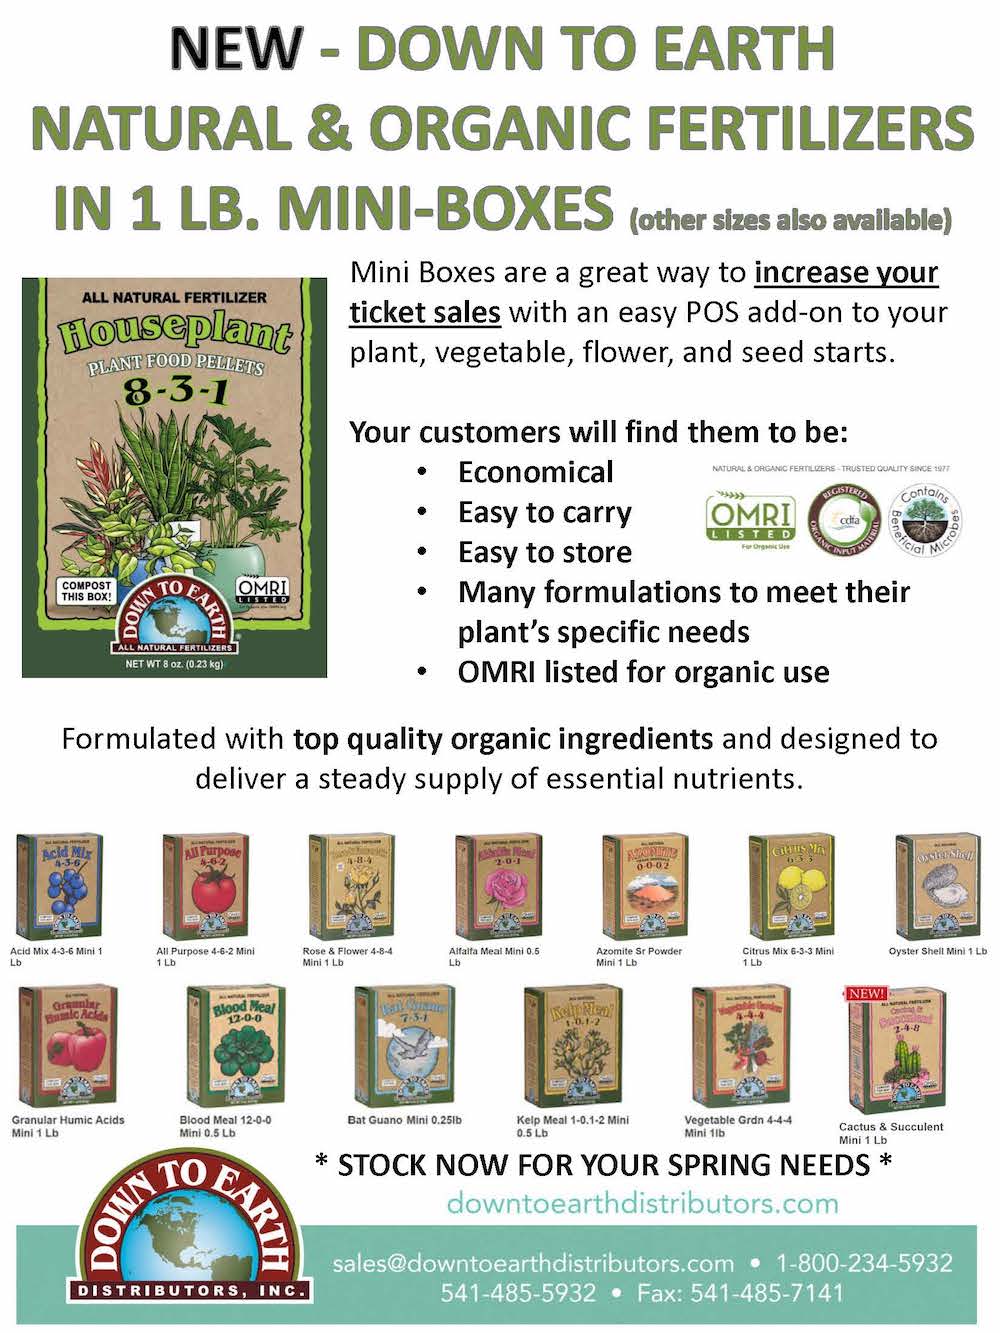 Mini Boxes - Trial Size Organic Fertilizer From Down to Earth